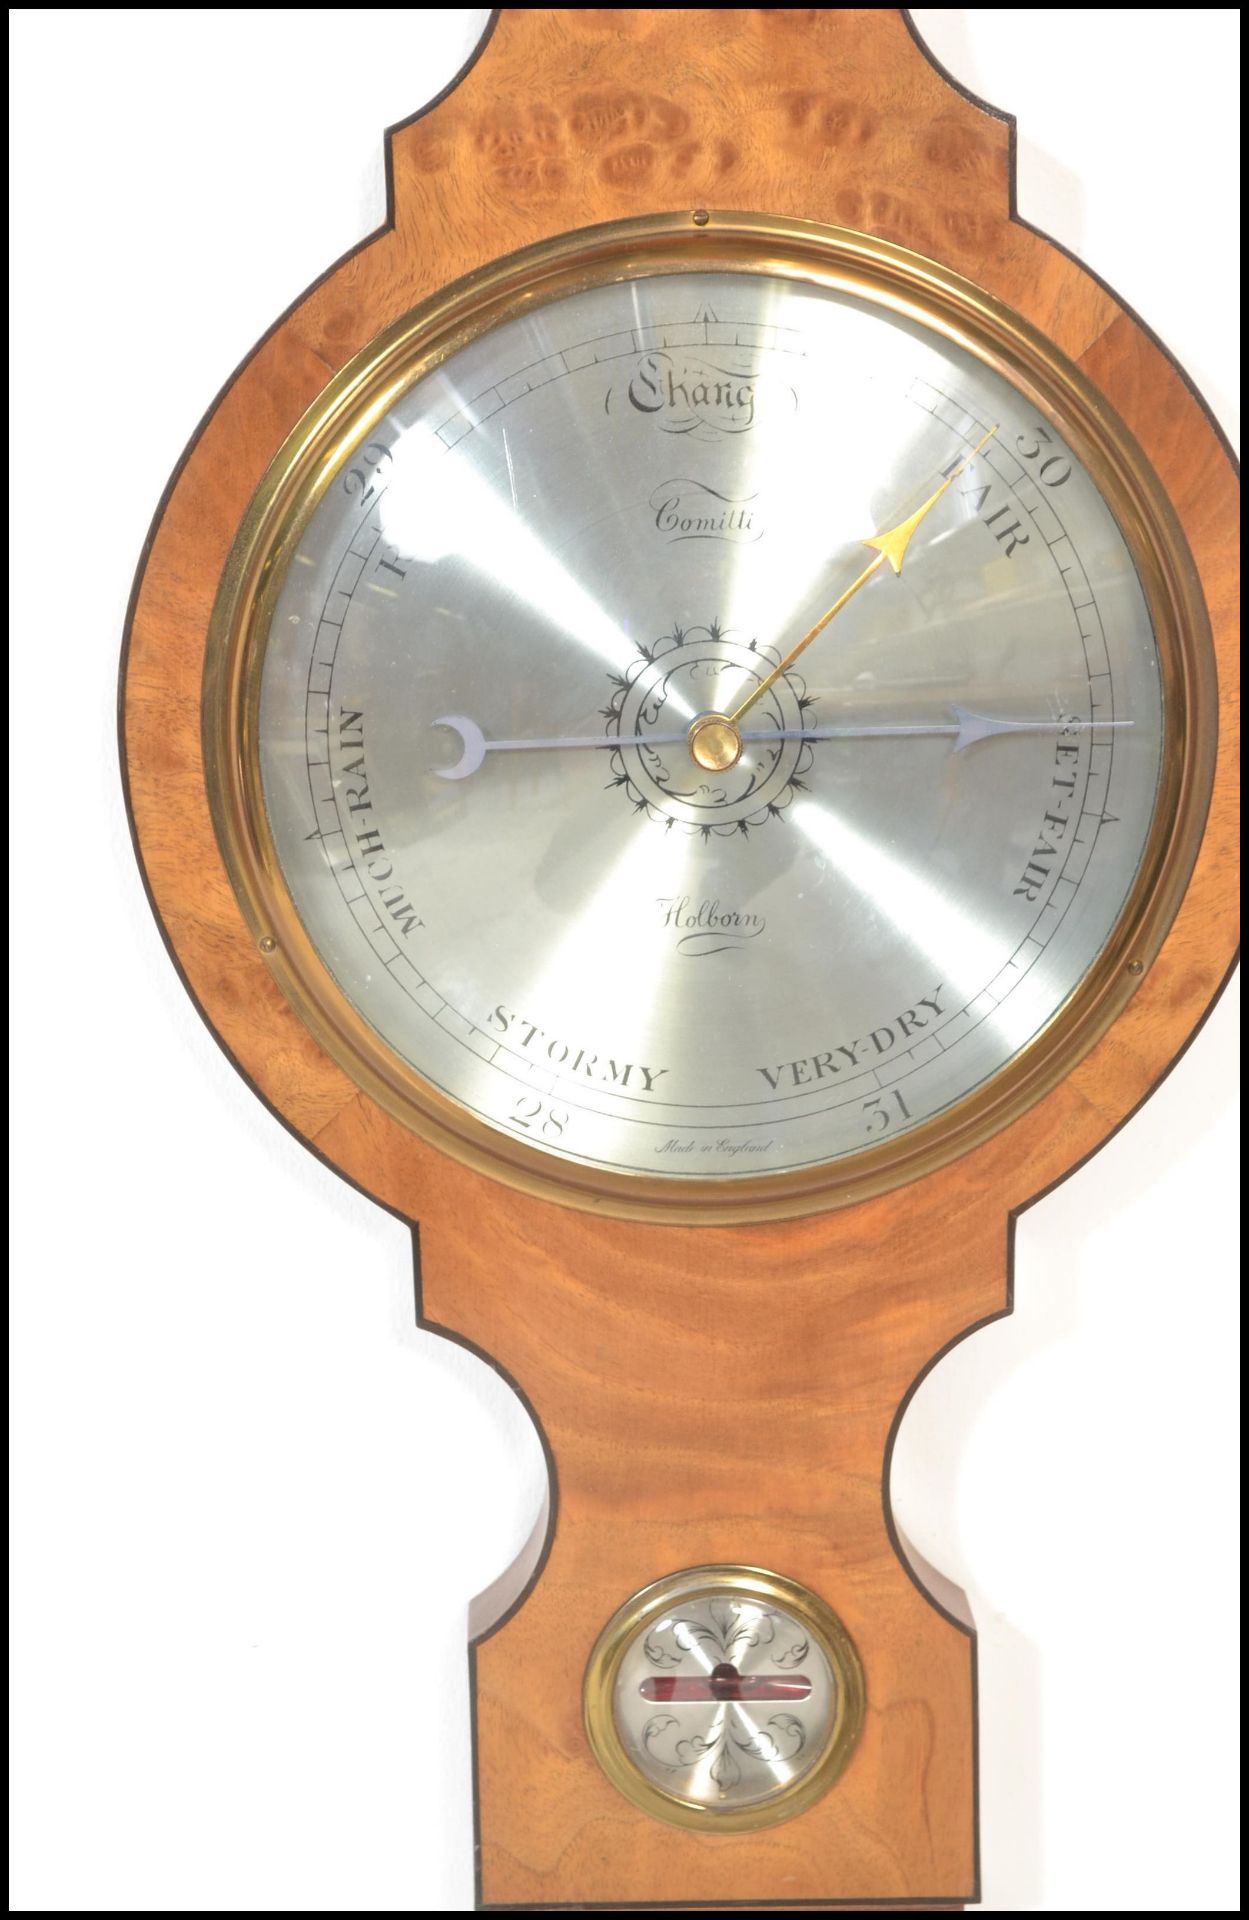 A 20th Century Georgian antique revival satin wood wooden cased wall barometer by Comitti of - Image 2 of 5